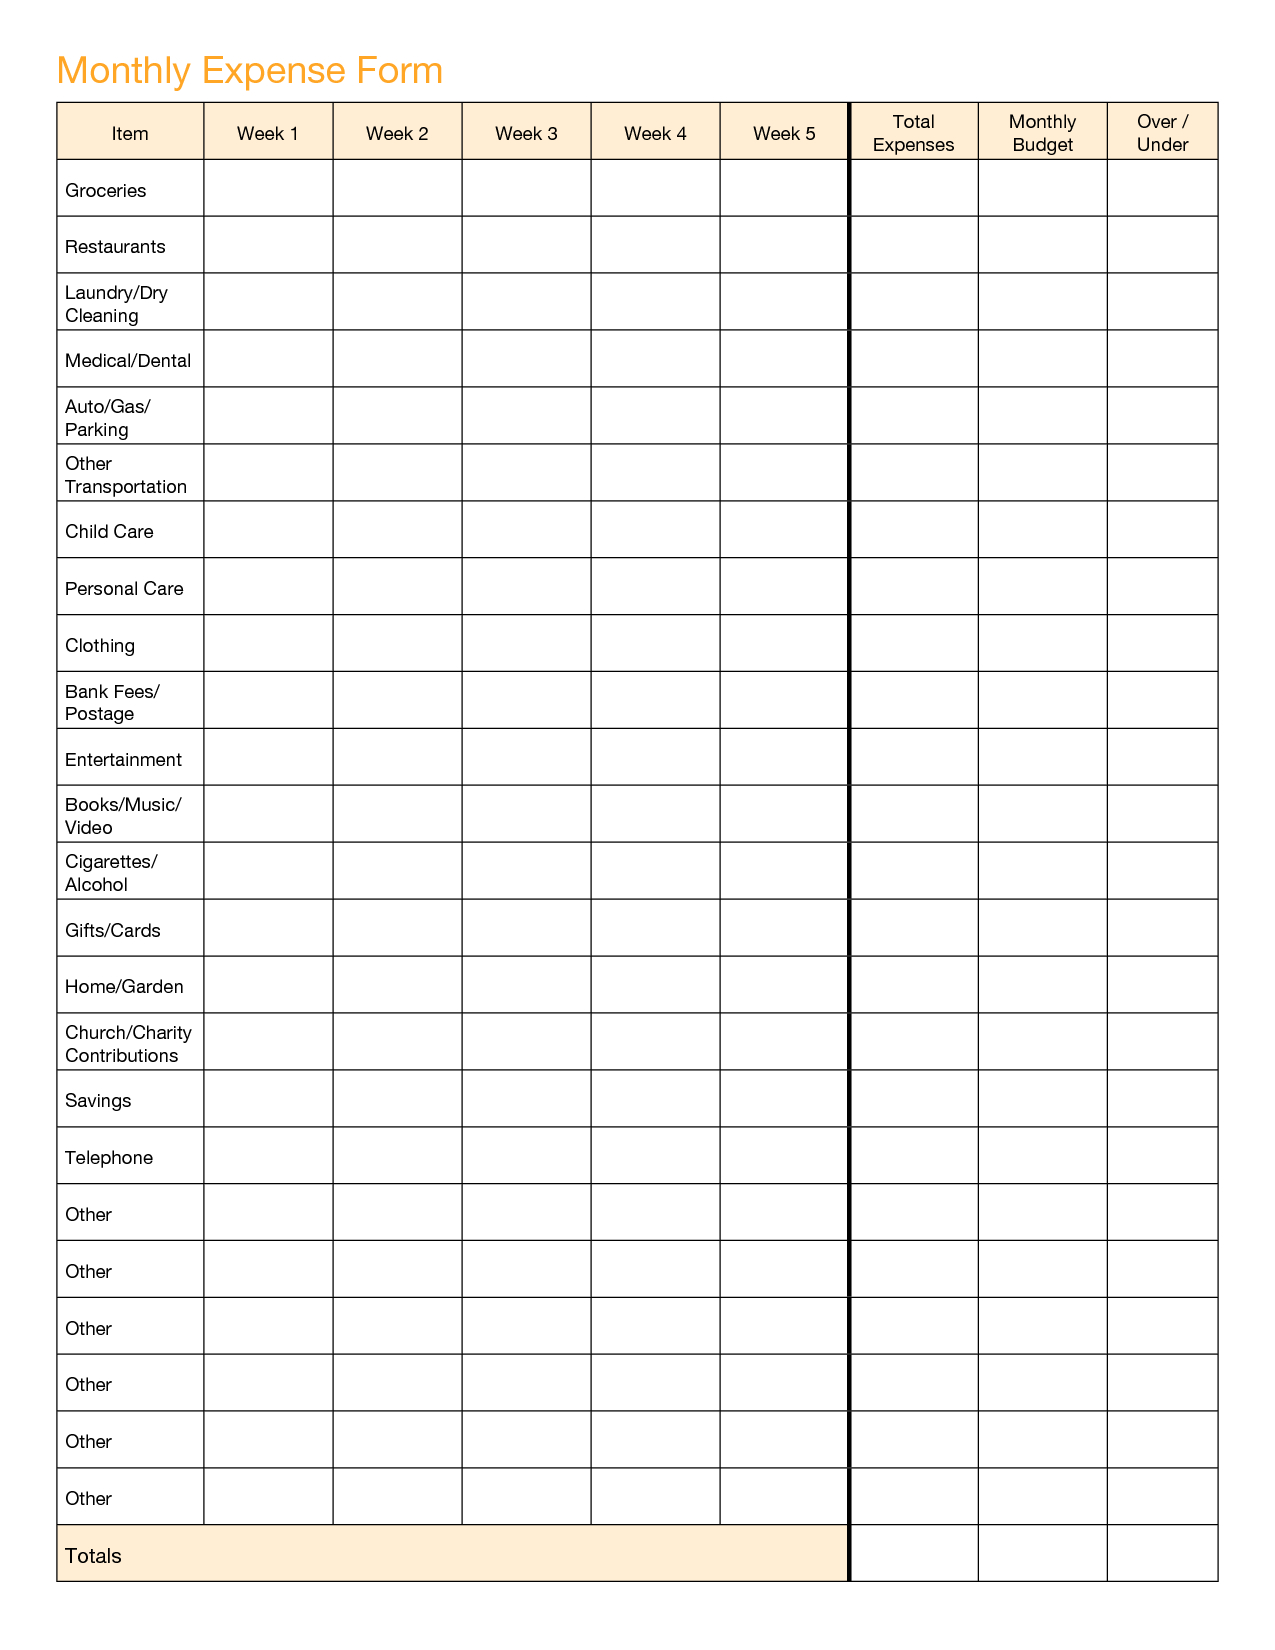 Small Business Spreadsheet For Income And Expenses Free For Income And Expenses Spreadsheet Small Business  Homebiz4U2Profit